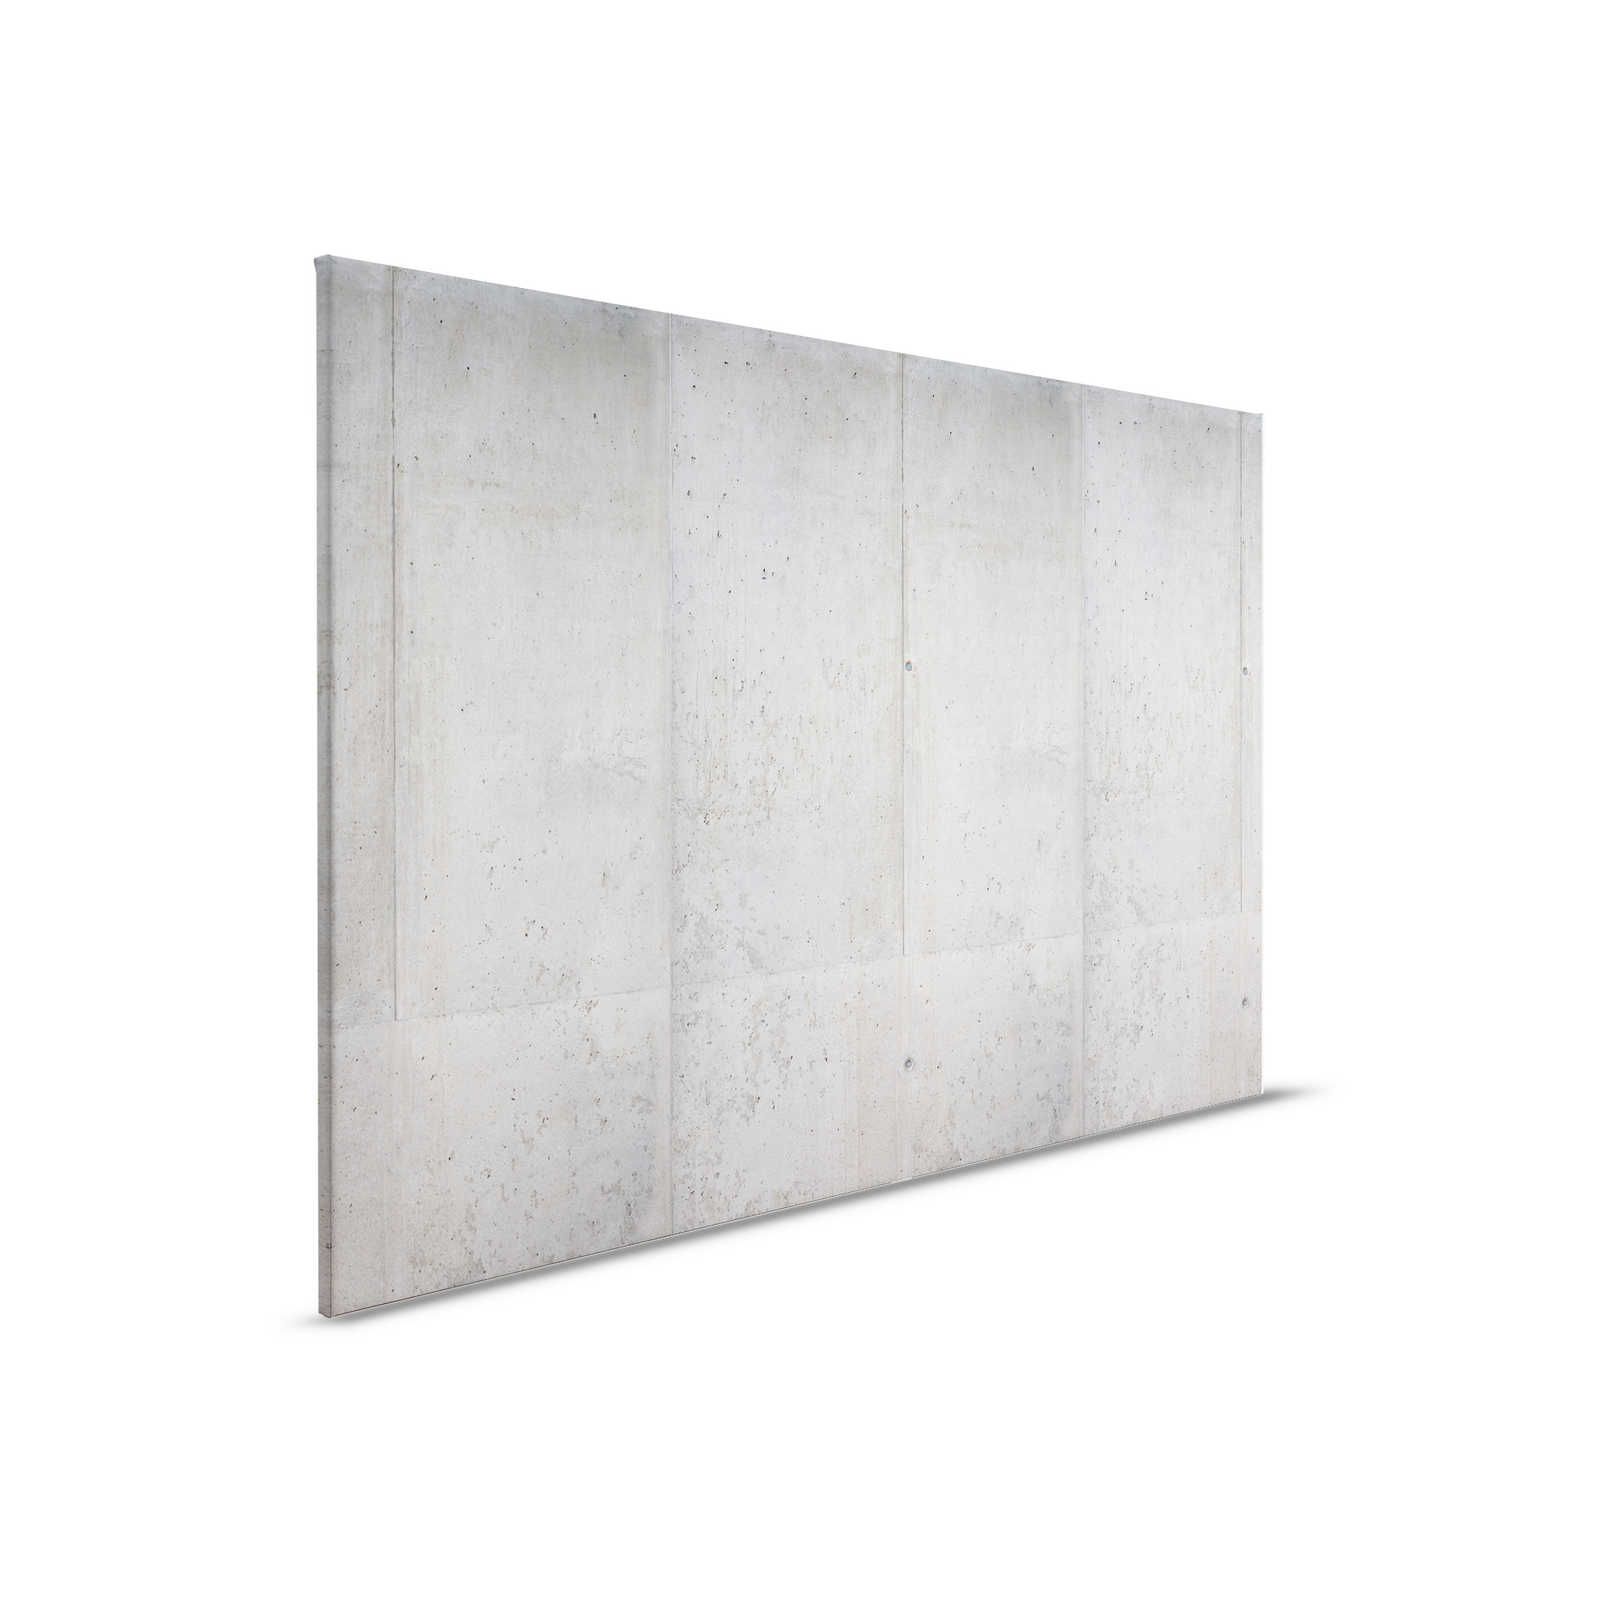         Concrete Canvas Painting Industrial Style Exposed Concrete Wall - 0.90 m x 0.60 m
    